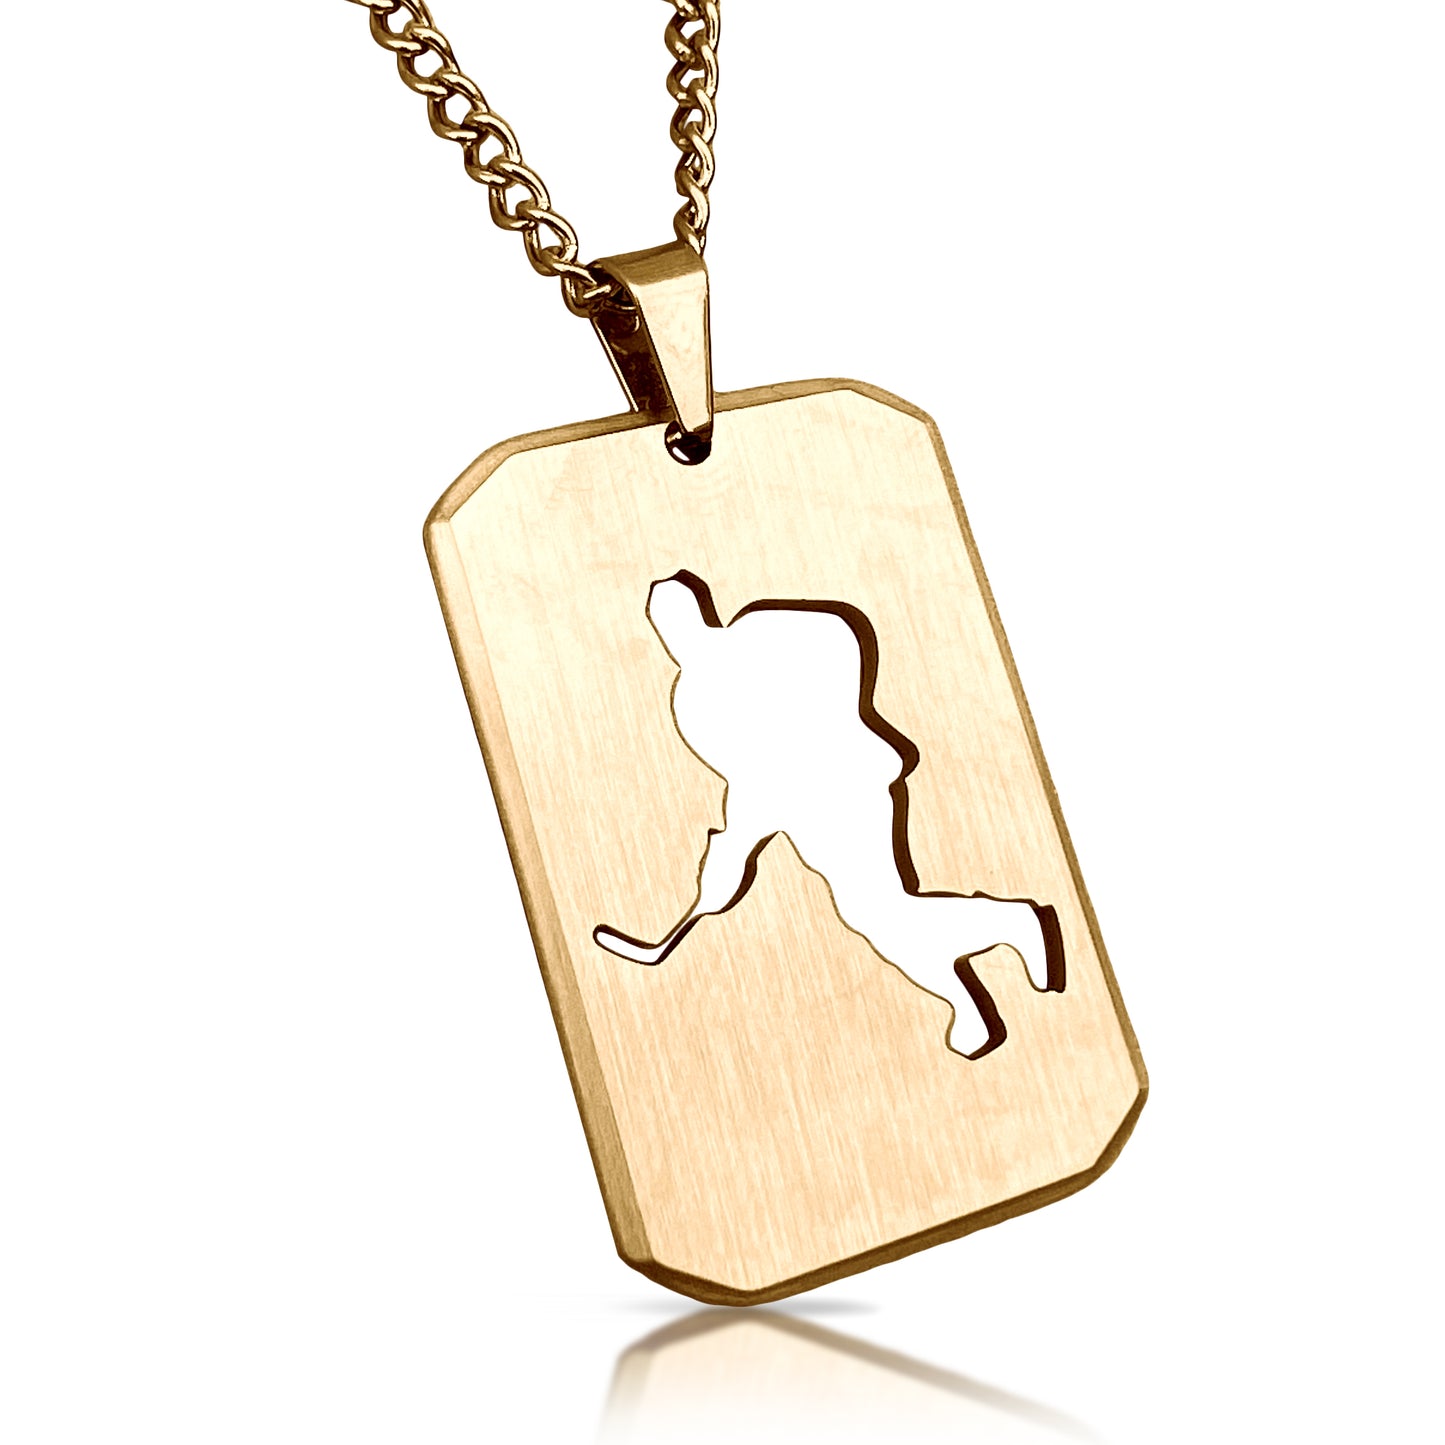 Hockey Cut Out Pendant With Chain Necklace - 14K Gold Plated Stainless Steel